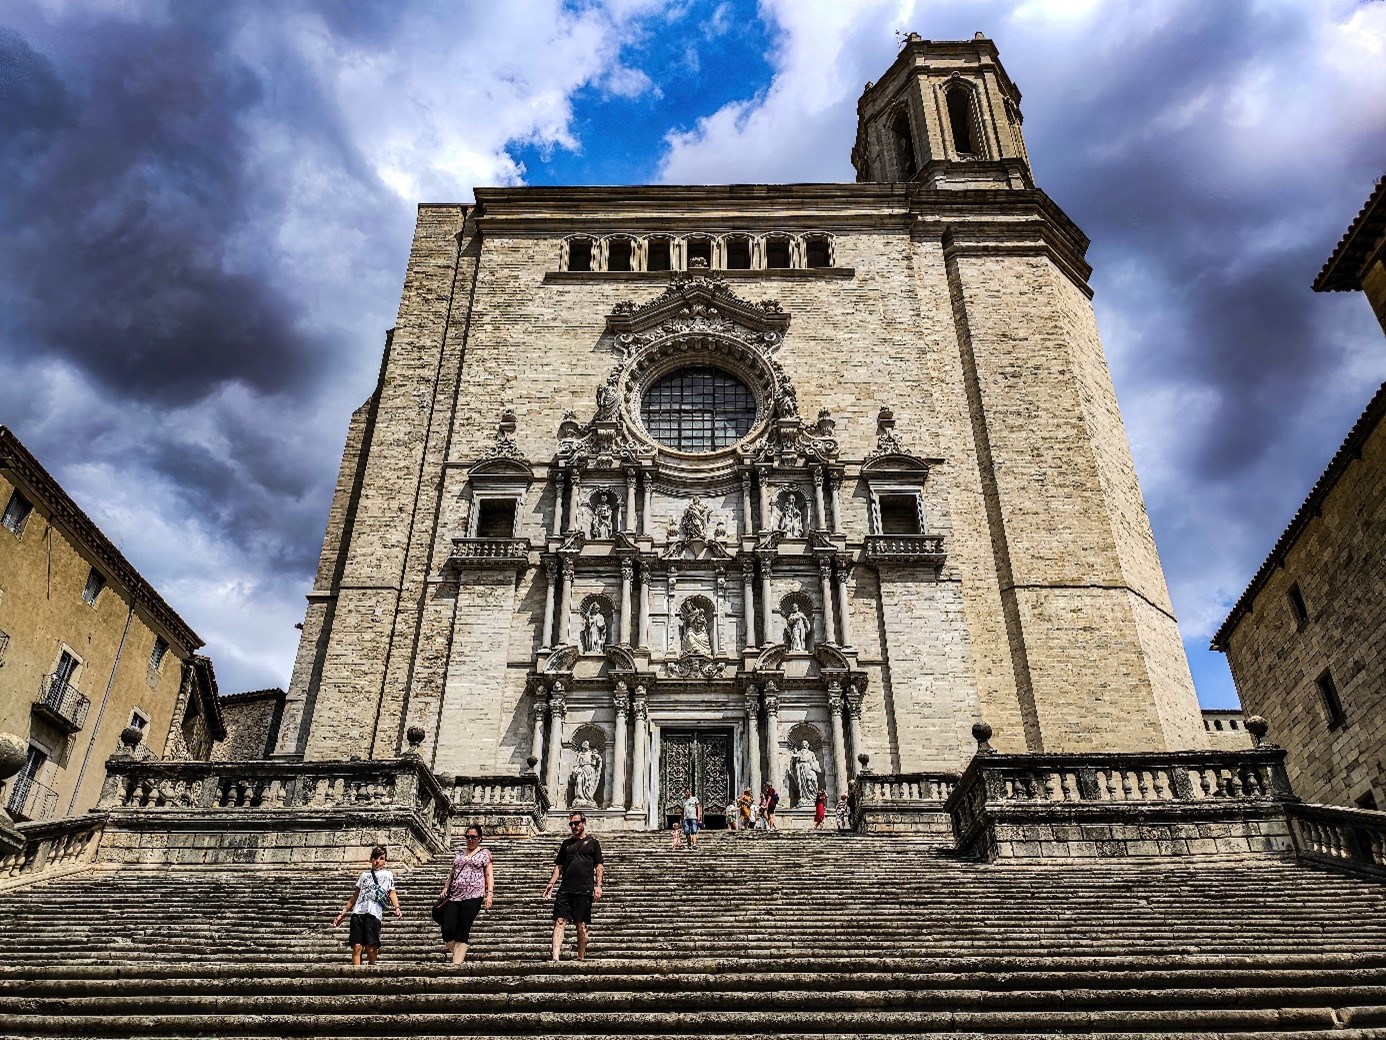 Several places in Girona were used as a filming location for the Game of Thrones series